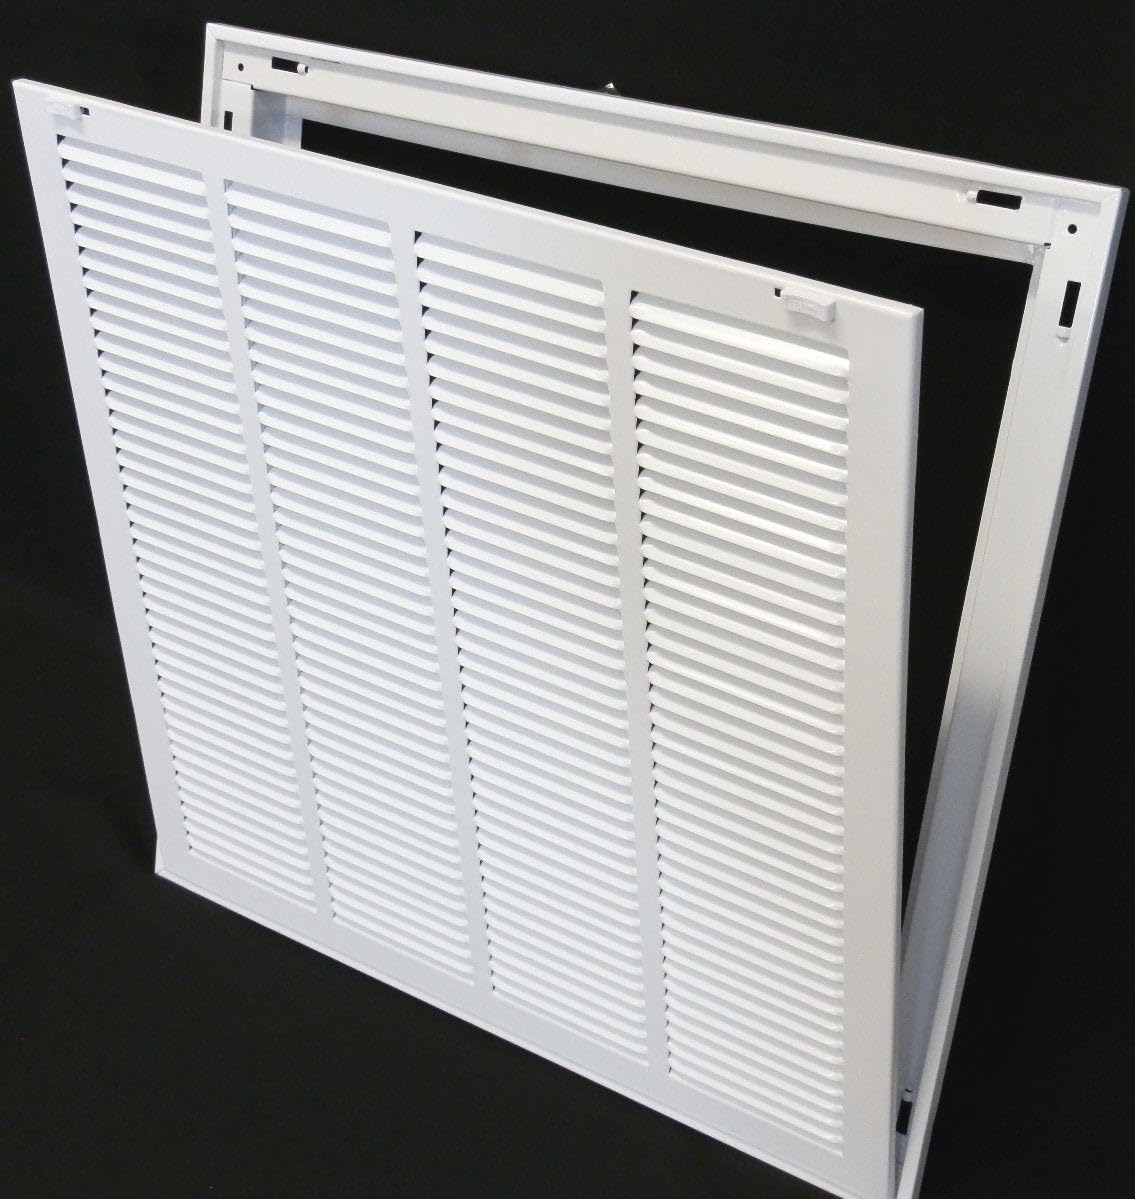 16&quot; X 30&quot; Steel Return Air Filter Grille for 1&quot; Filter - Removable Frame - [Outer Dimensions: 18 5/8&quot; X 32 5/8&quot;]